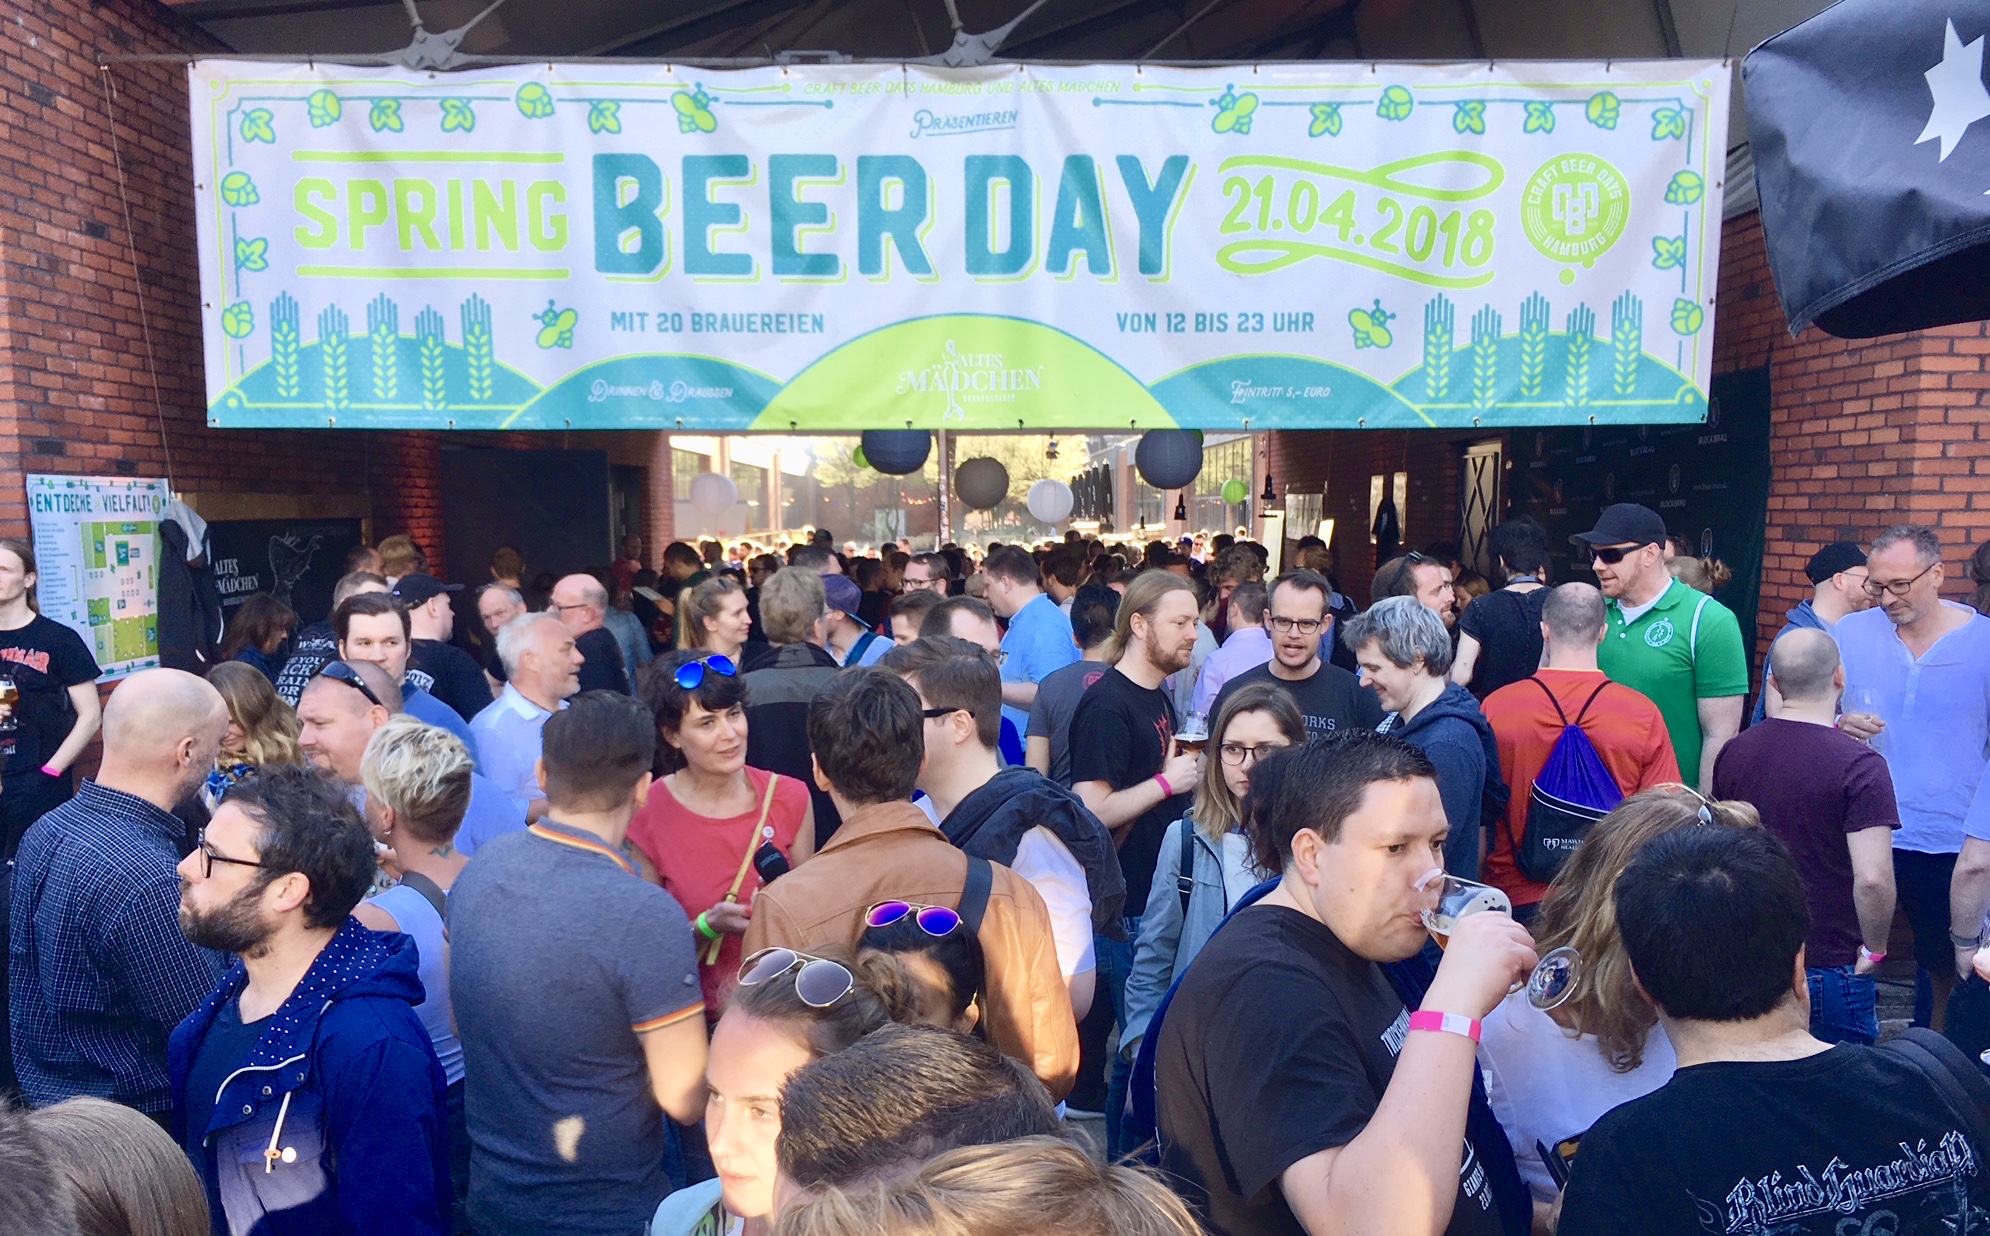 HHopcast-Special: Umfrage beim Spring Beer Day Hamburg. Was sind eure Bier-Favourites? post thumbnail image